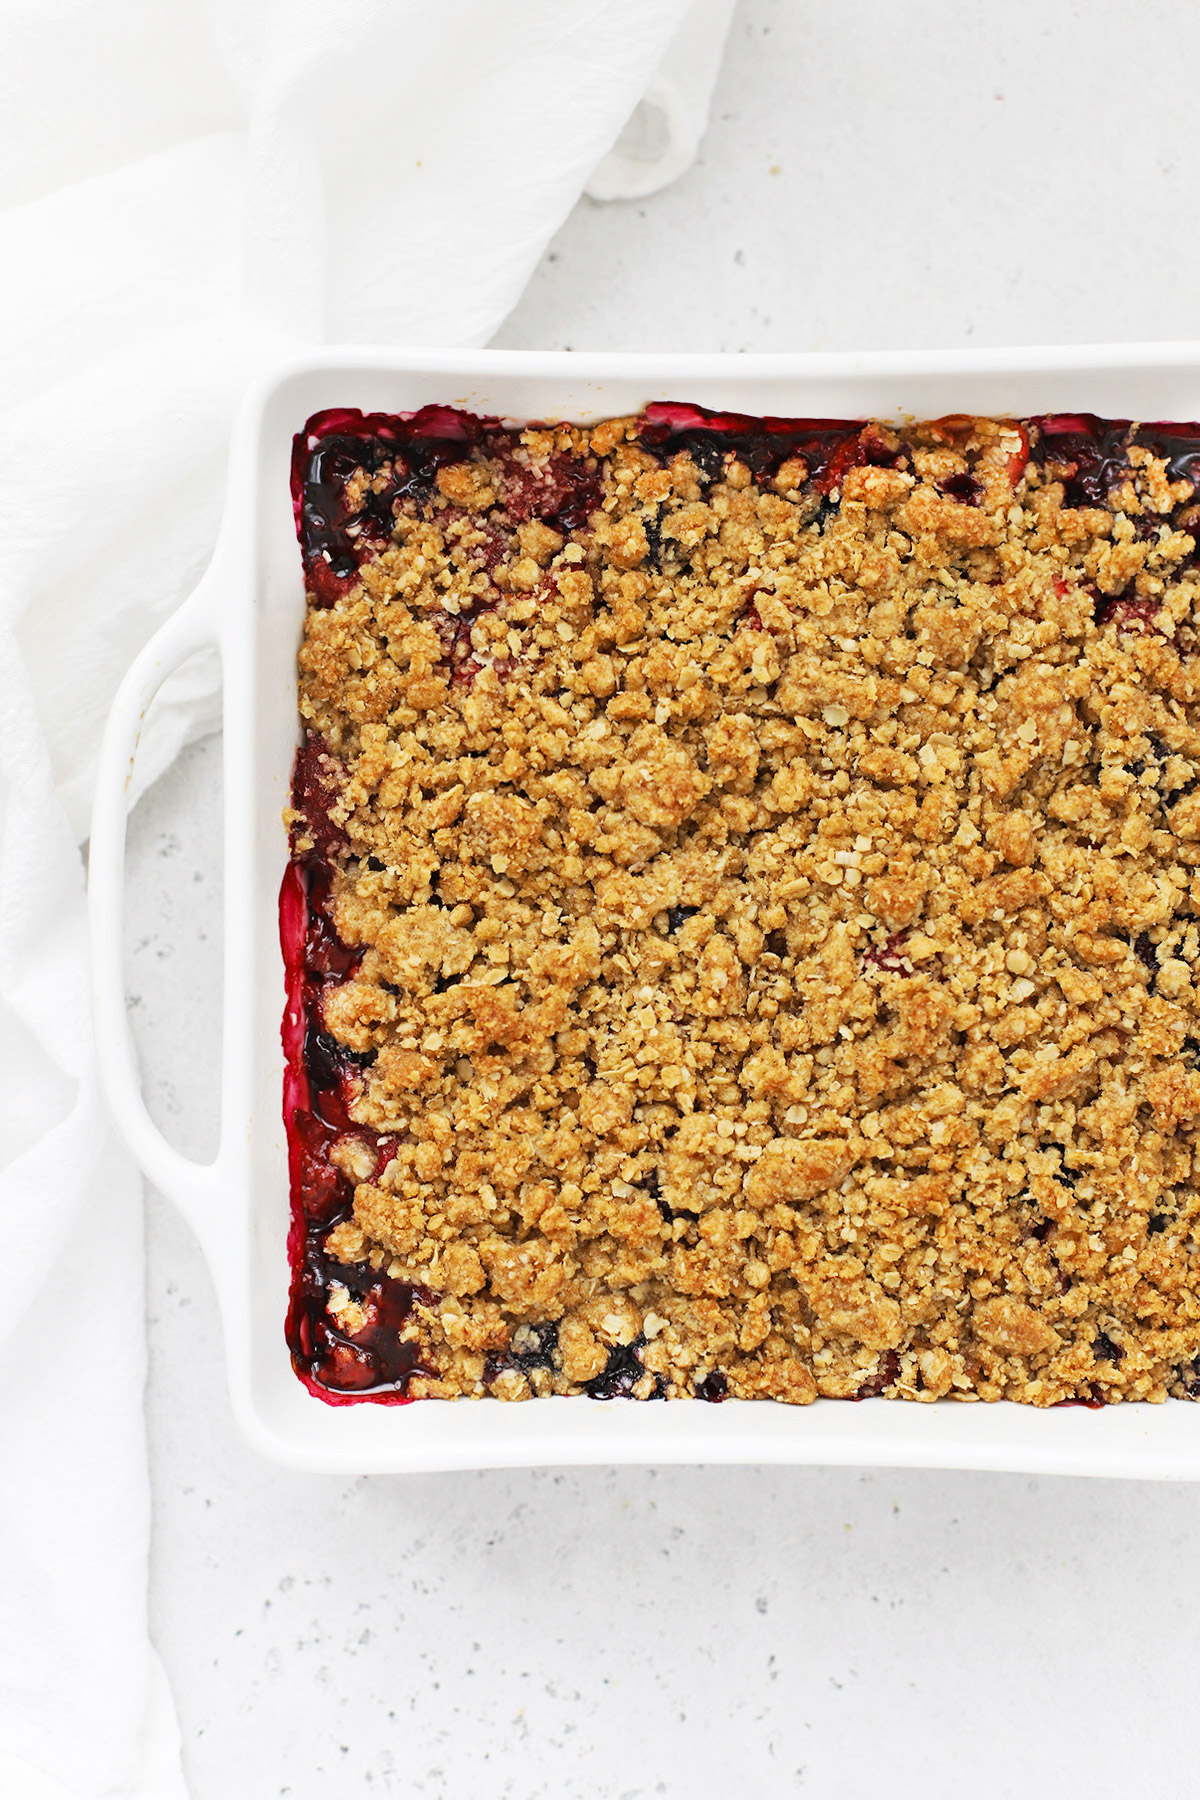 Overhead view of a baking dish of gluten-free berry crisp on a white background